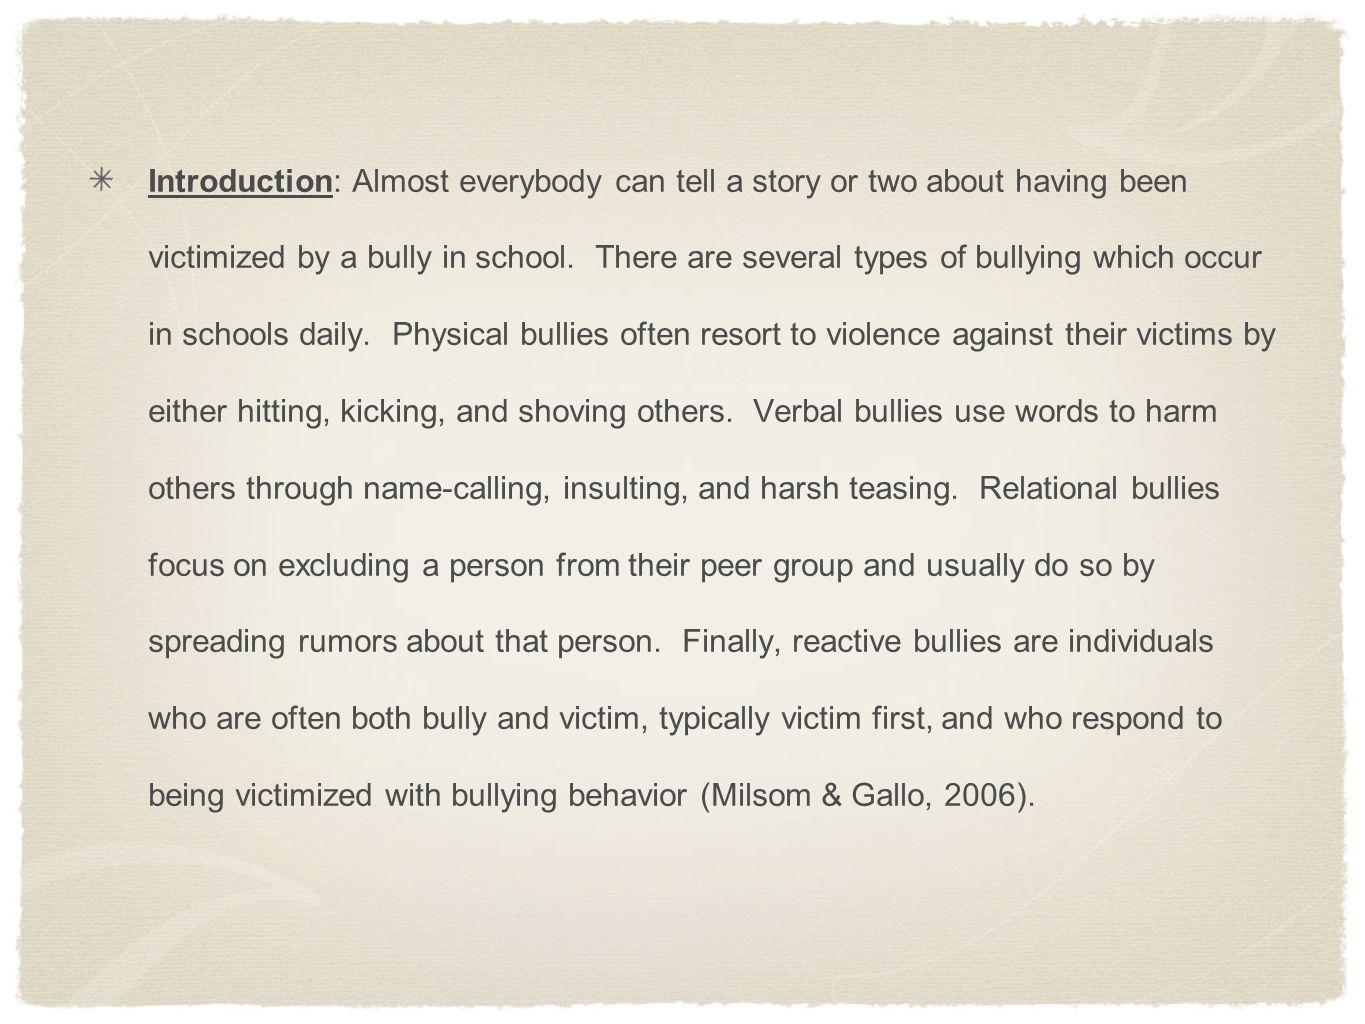 best of Of bullying victim on the verbal Effects